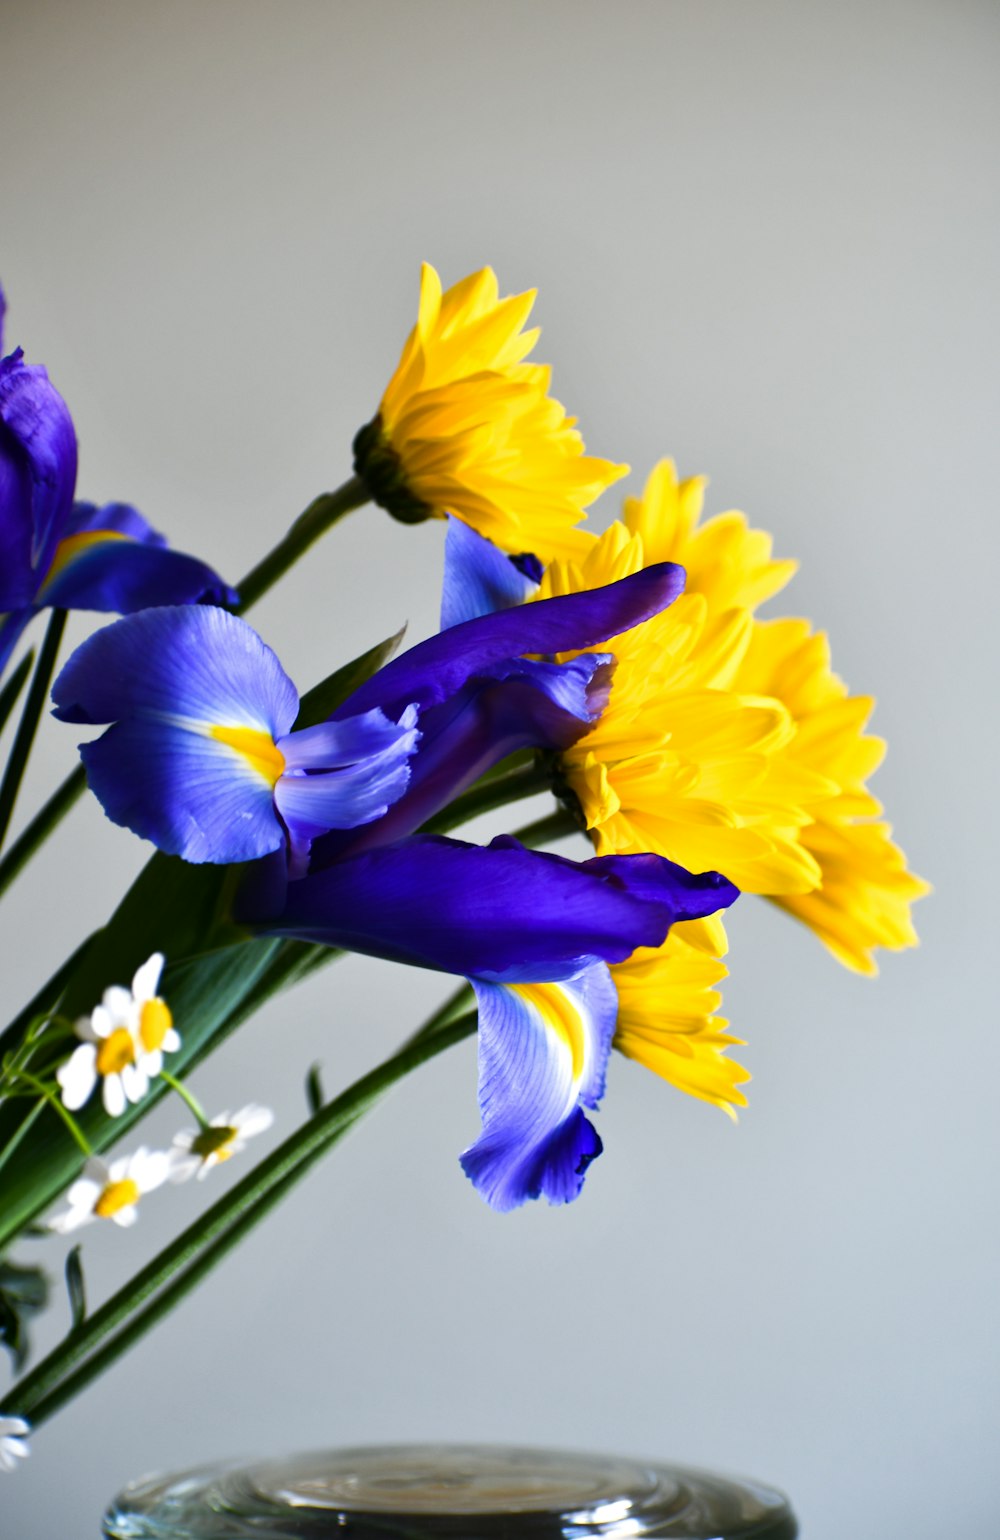 purple and yellow daffodils in bloom close up photo